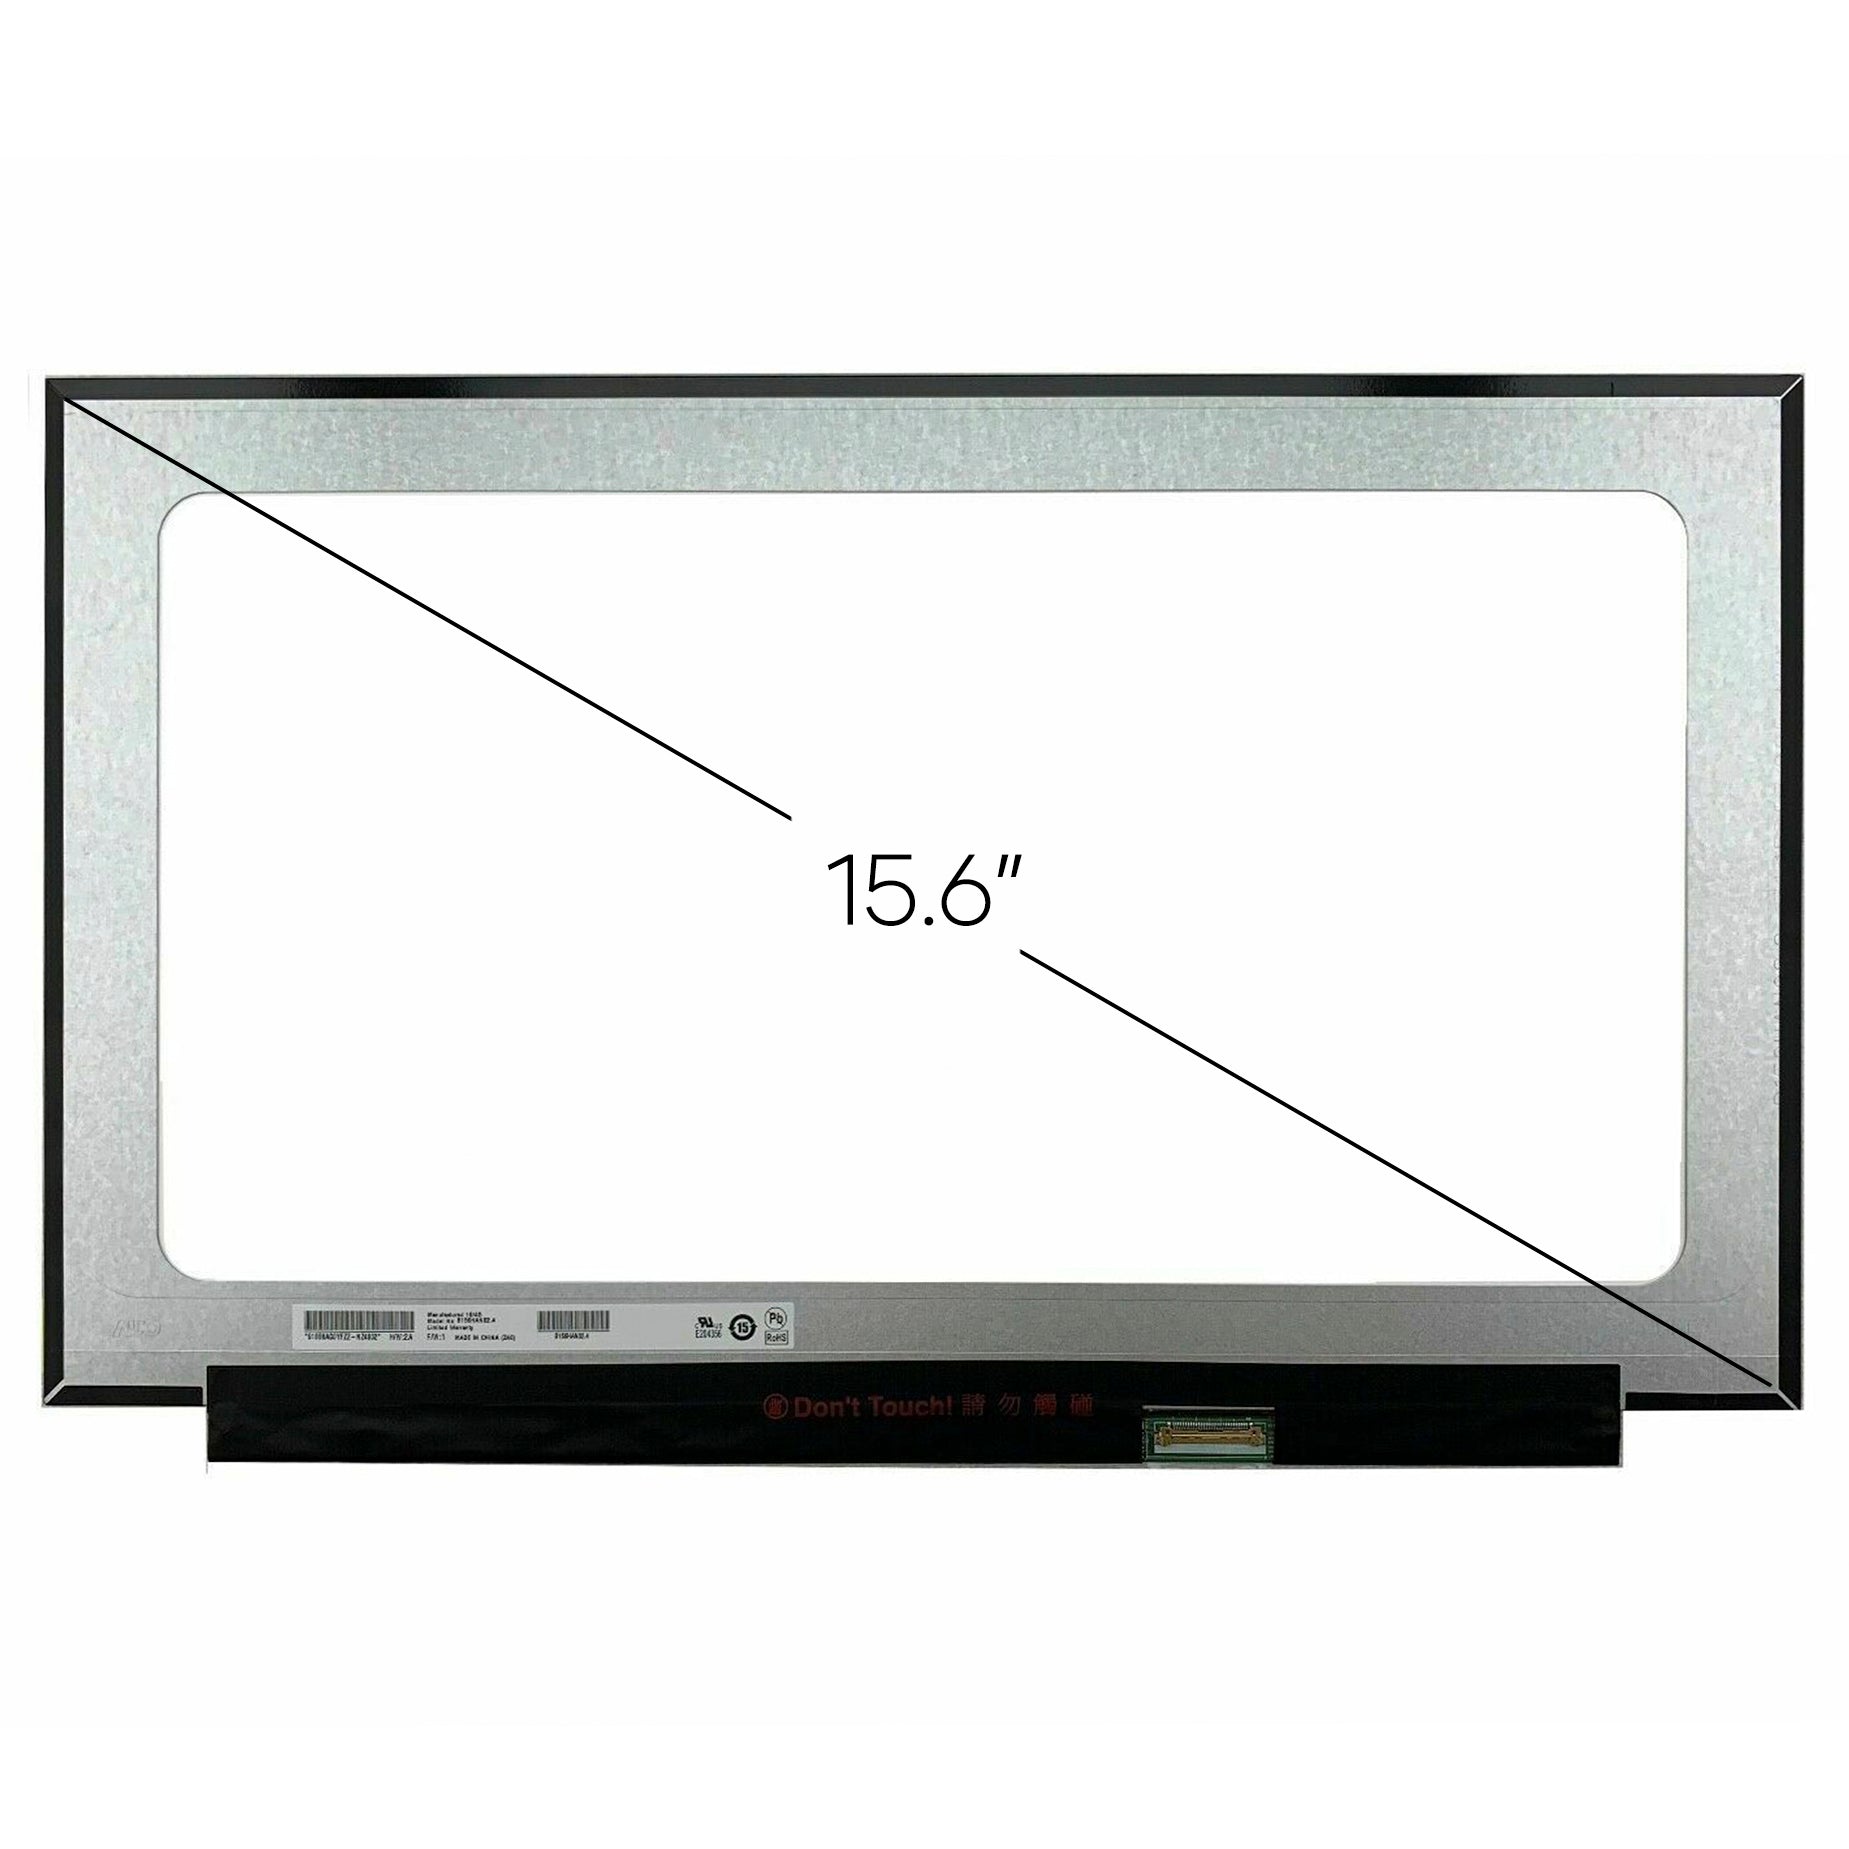 Screen Replacement for Lenovo PN 5D10P53898 HD 1366x768 Matte LCD LED Display